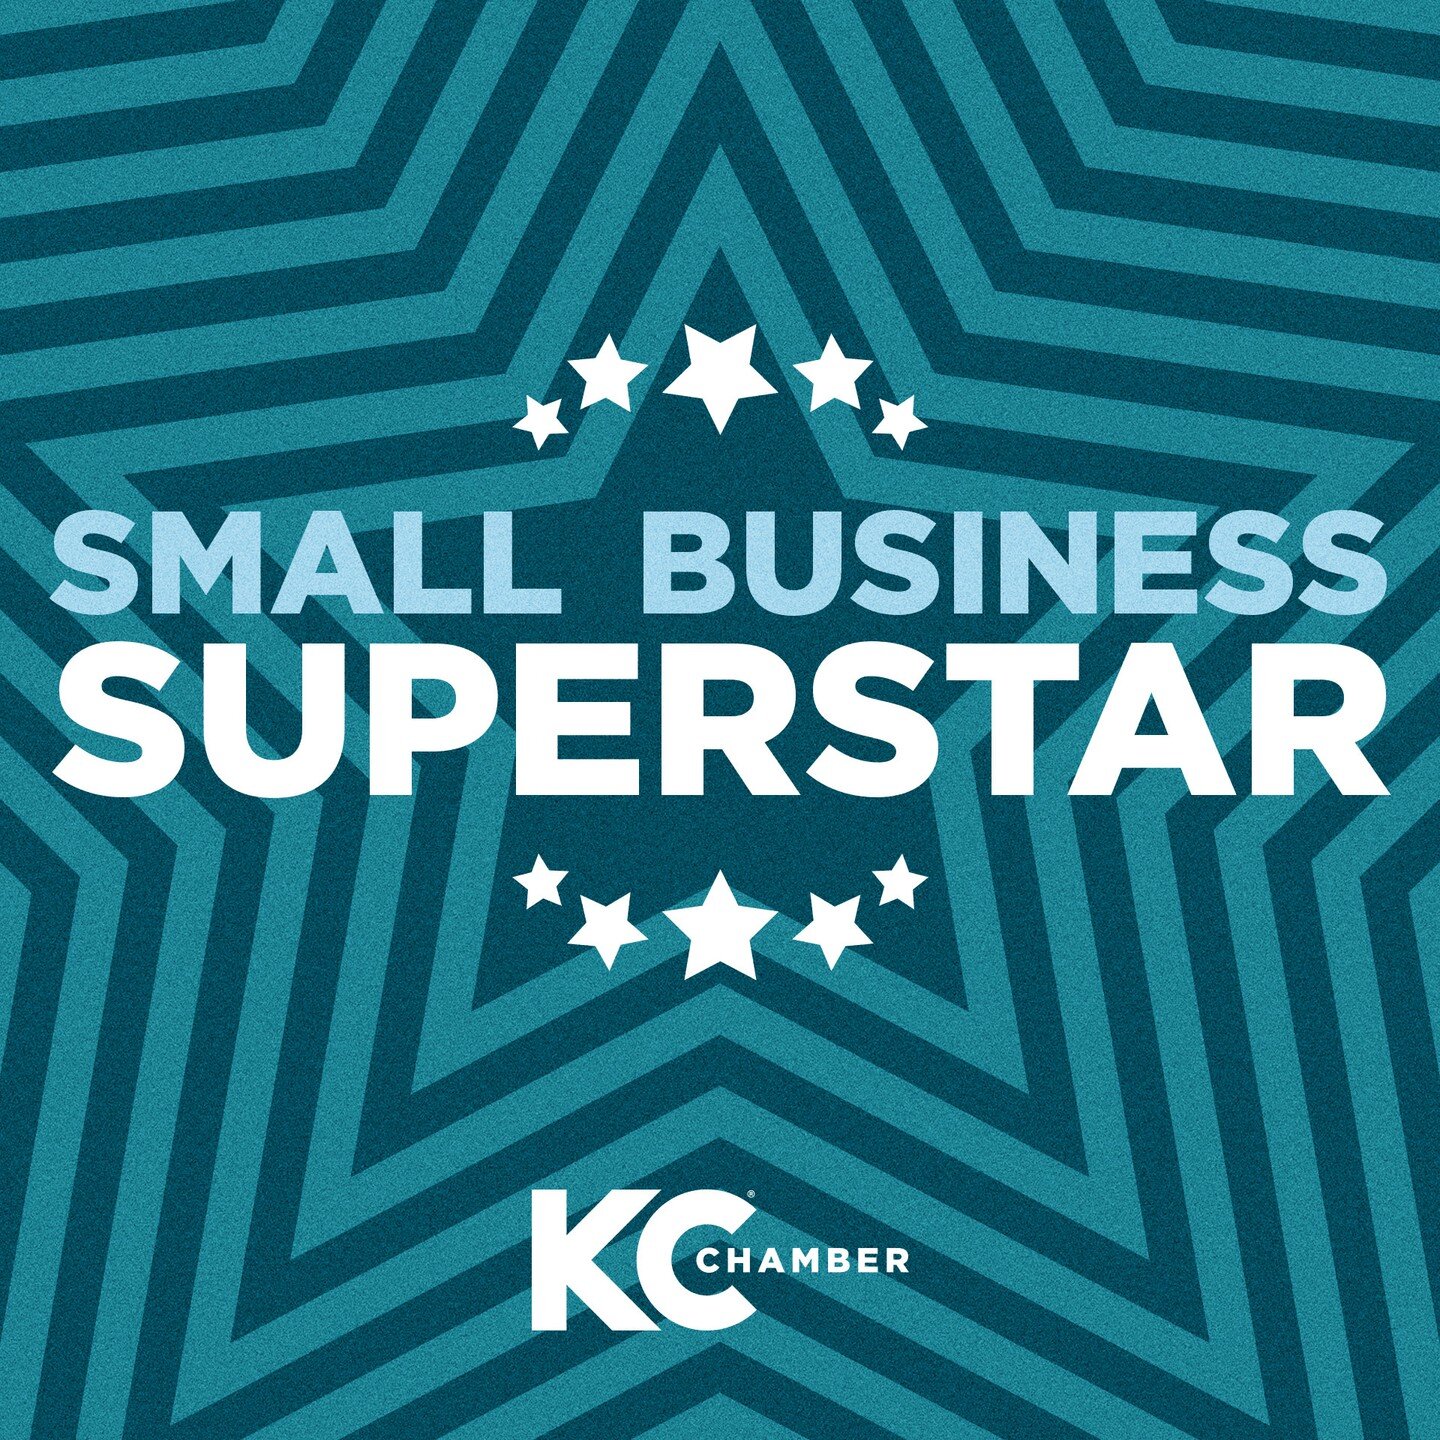 We're so honored to be named one of the Kansas City Chamber of Commerce Small Business Superstars! A big thank you to everyone for their continued support and recognition. Together, we can help make small businesses an important part of our community